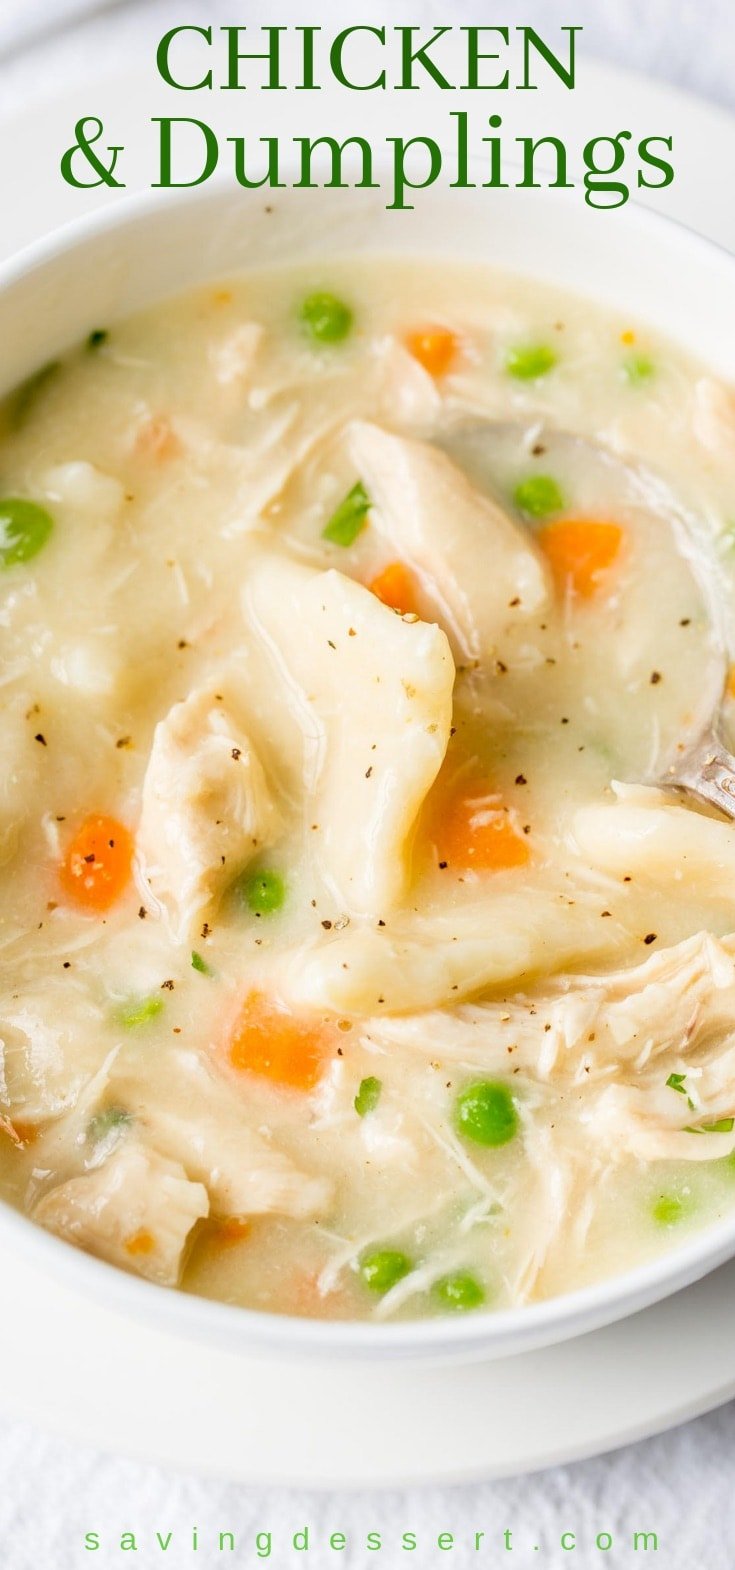 A bowl of chicken and dumplings with carrots, peas and plenty of black pepper